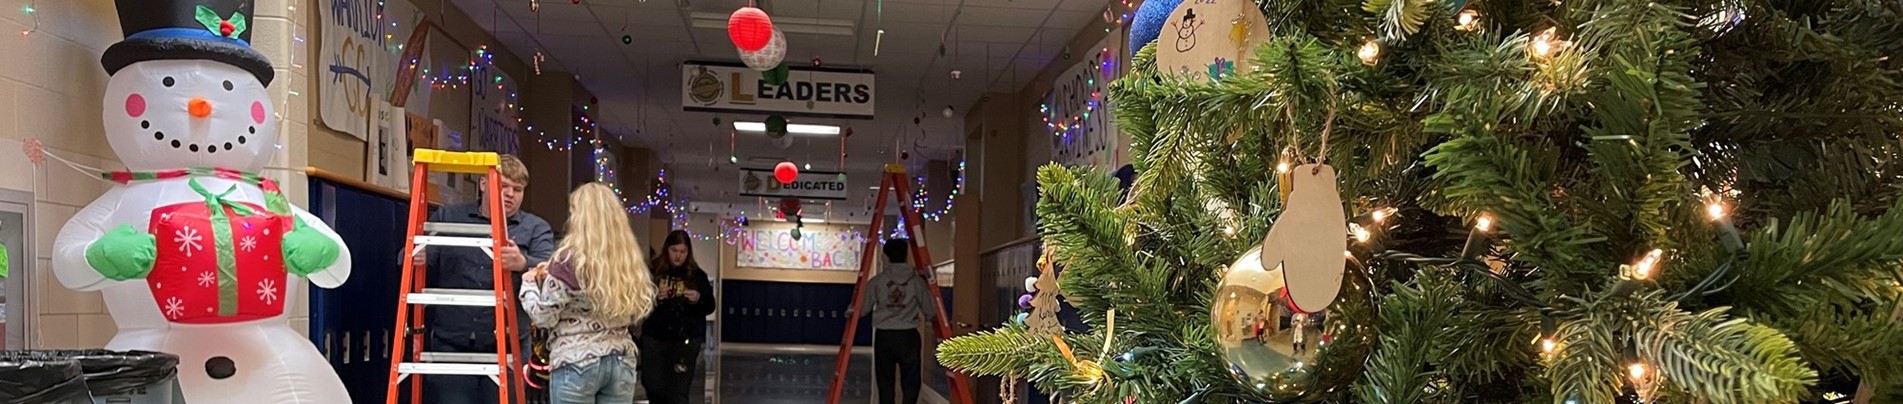 Student Council decorates for Christmas